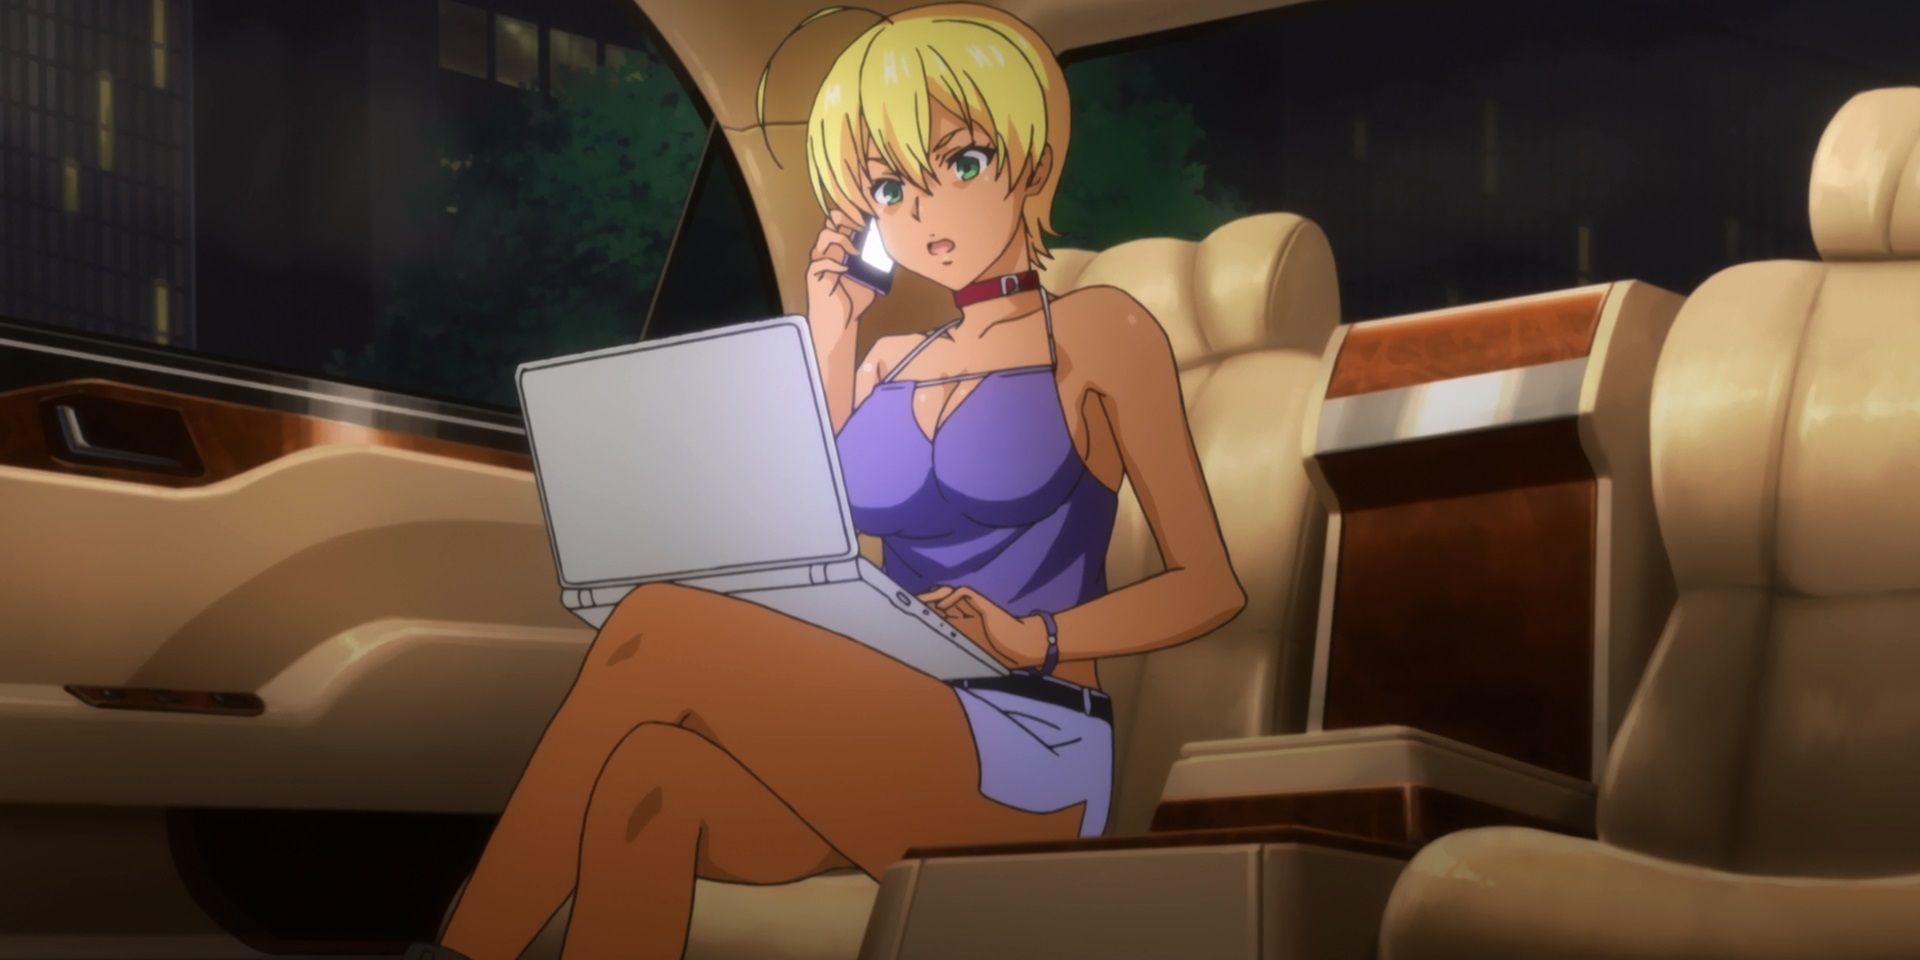 Ikumi Mito talking on the phone and on a lap top while sitting in a limousine from Food wars